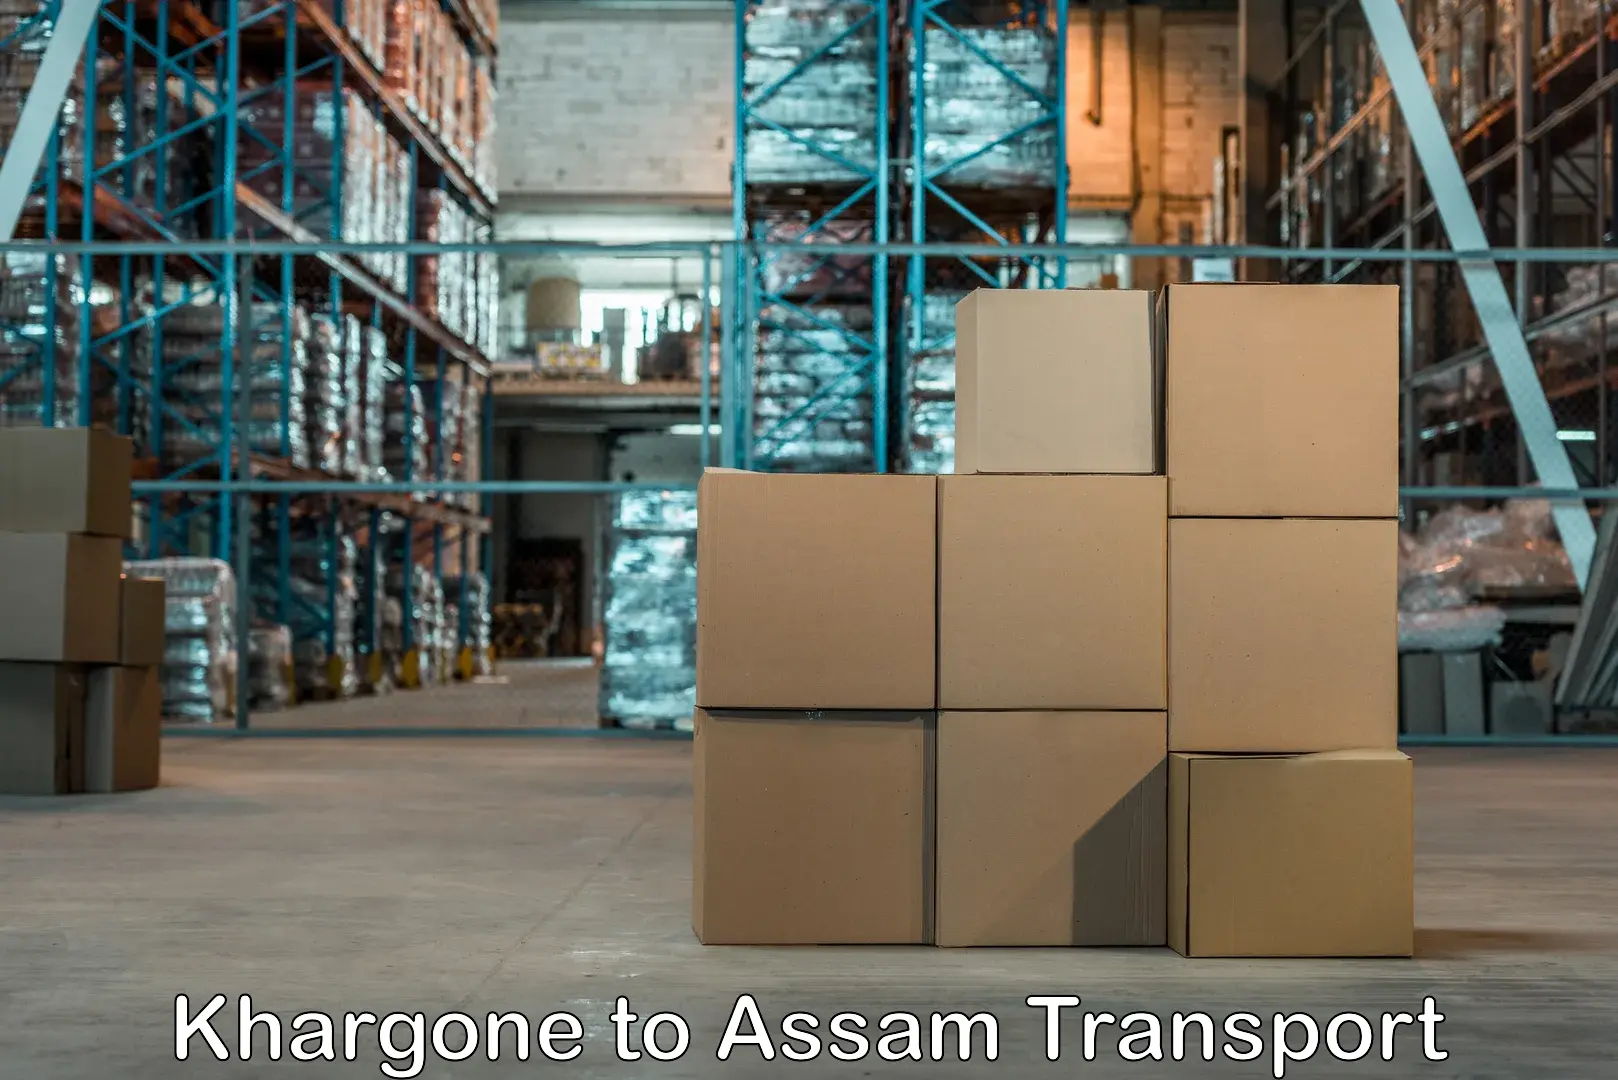 Delivery service Khargone to Gossaigaon